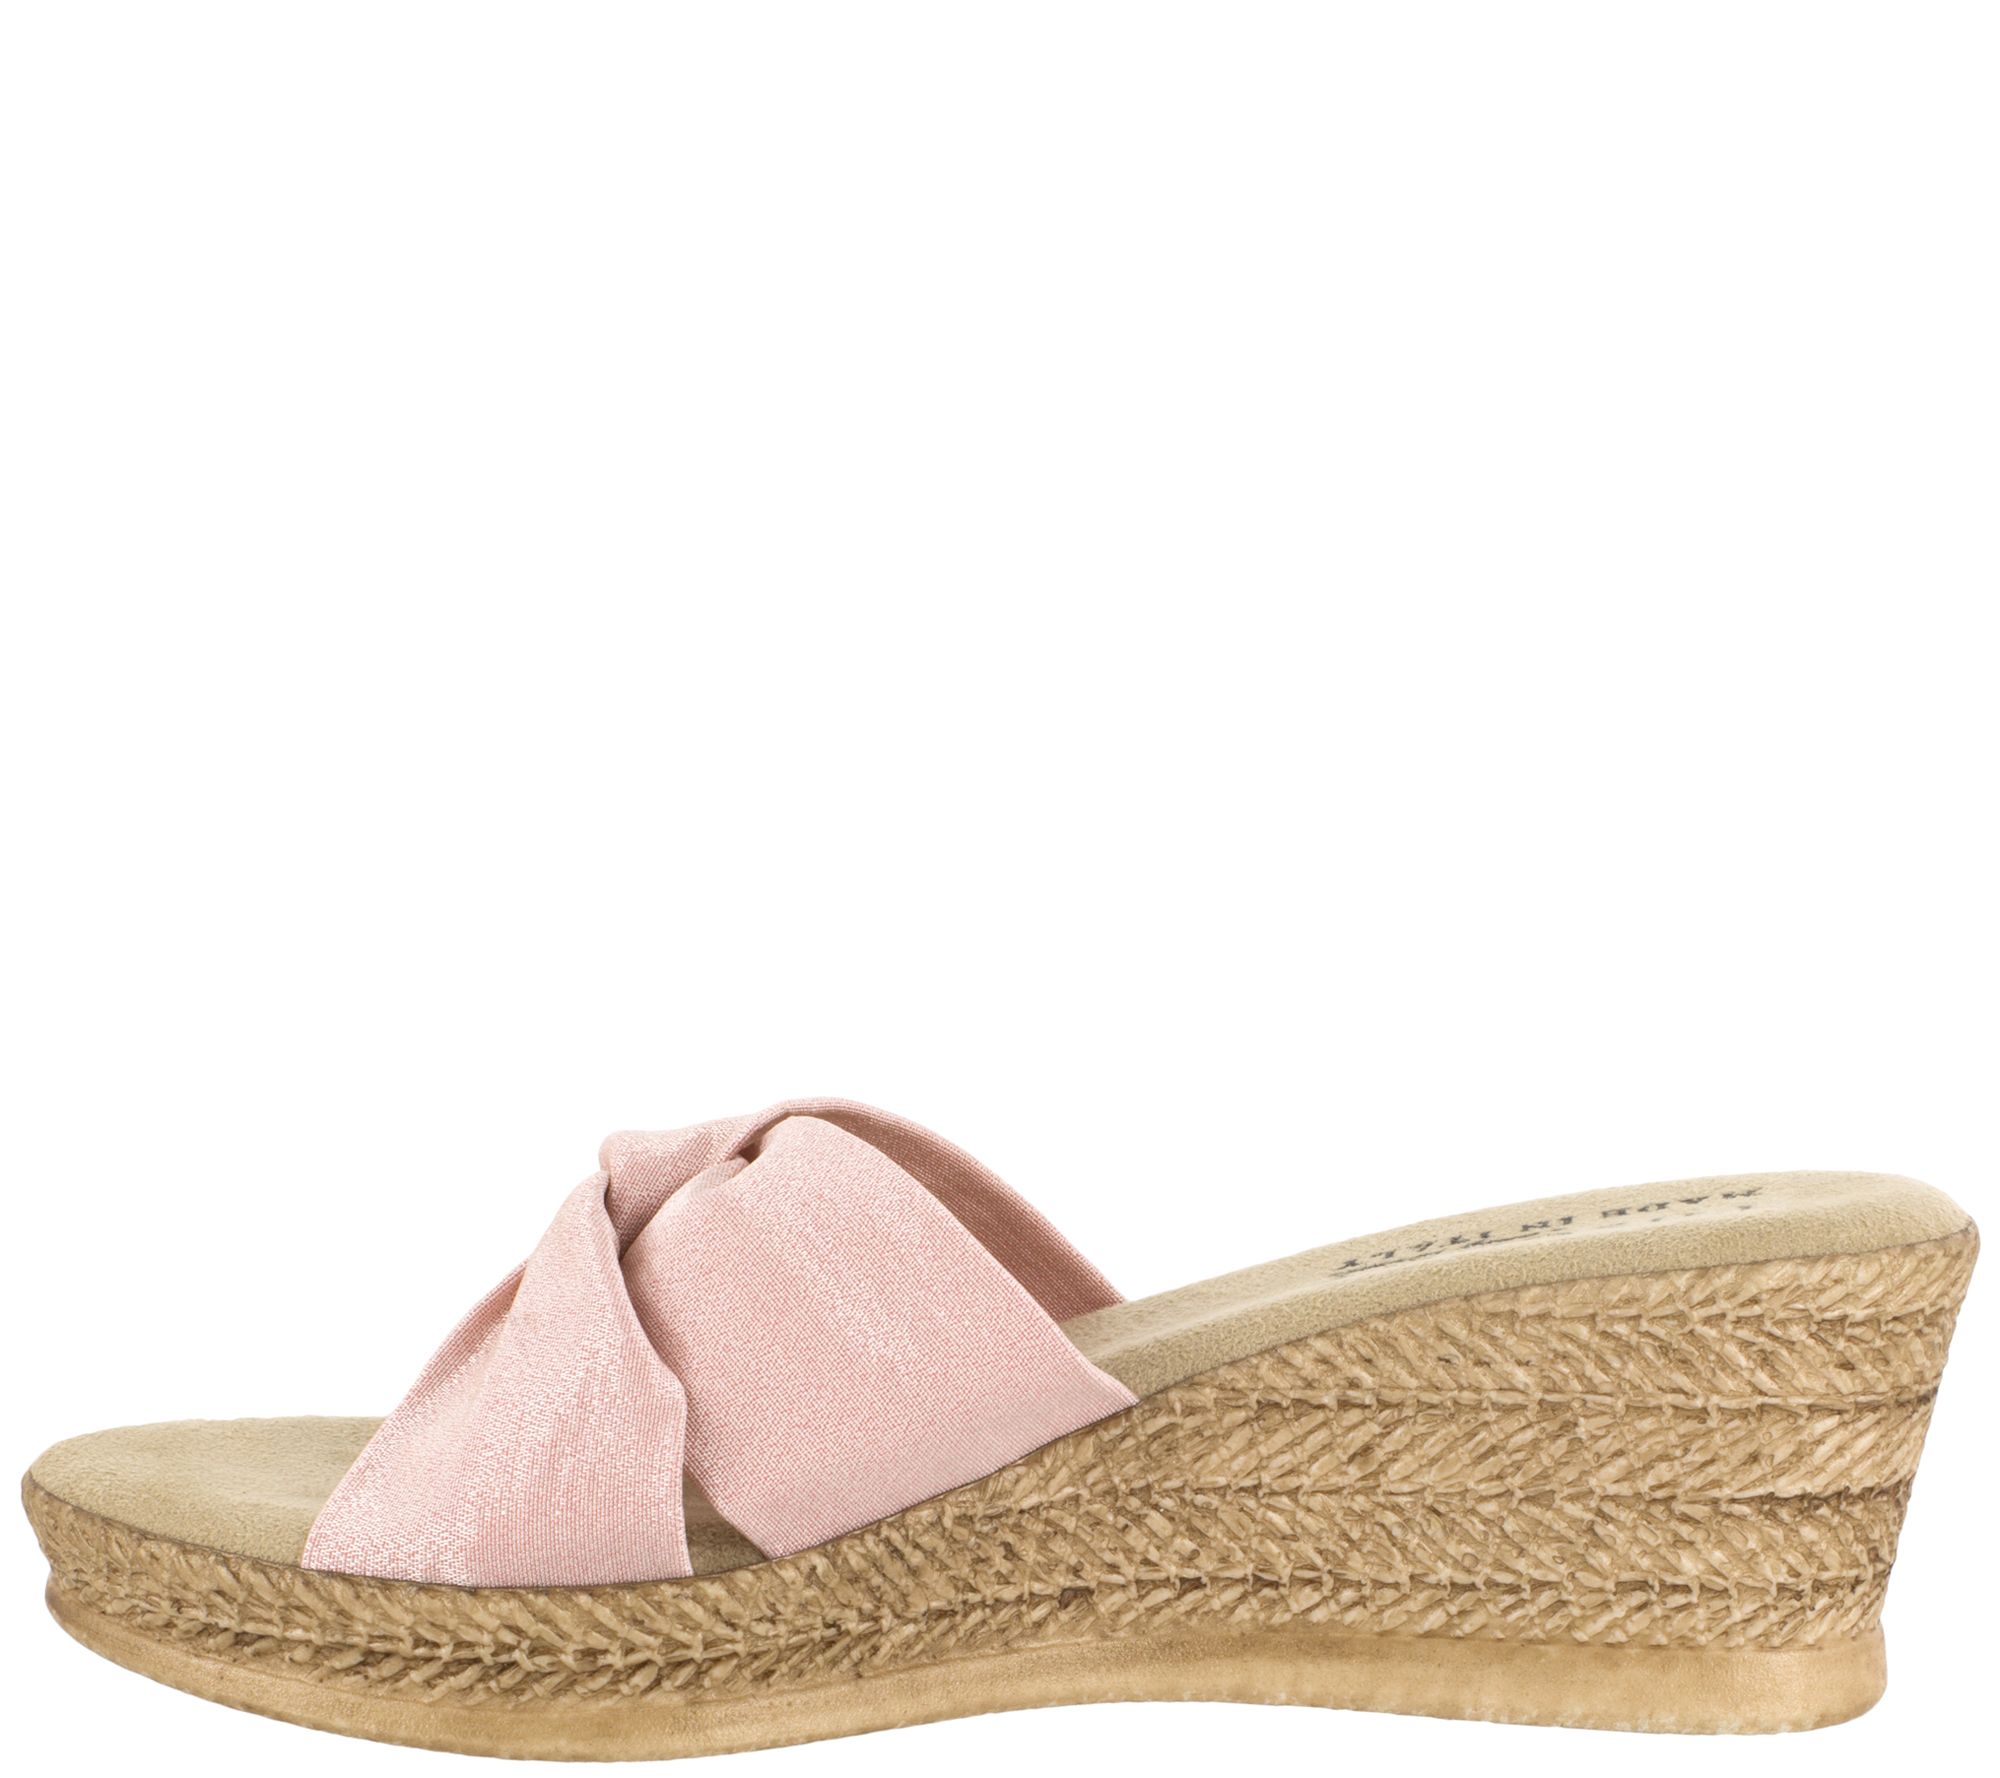 Tuscany by Easy Street Twist Fabric Wedge Sandals - Dinah - QVC.com